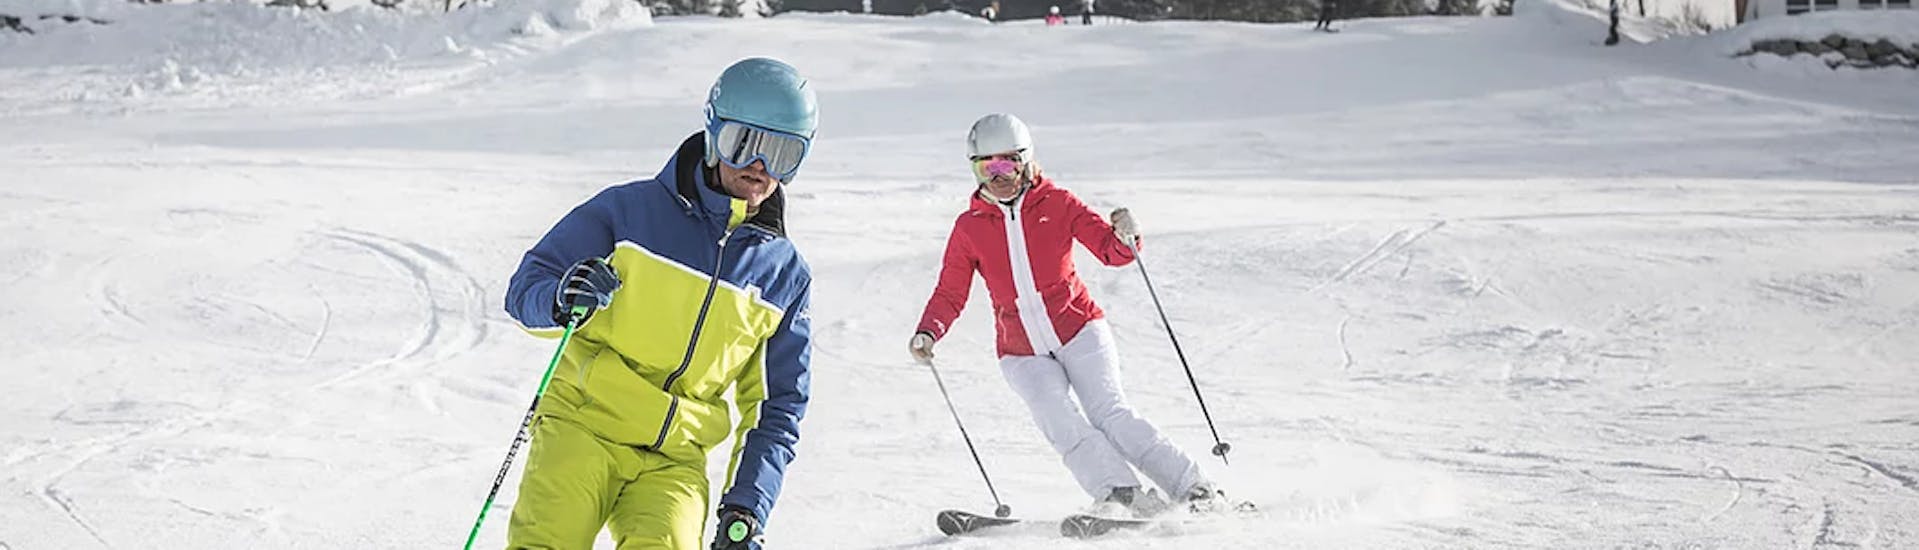 During the private ski course for adults in SalzburgerLand, a skier learns how to ski with her private ski instructor from deinskicoach.at.